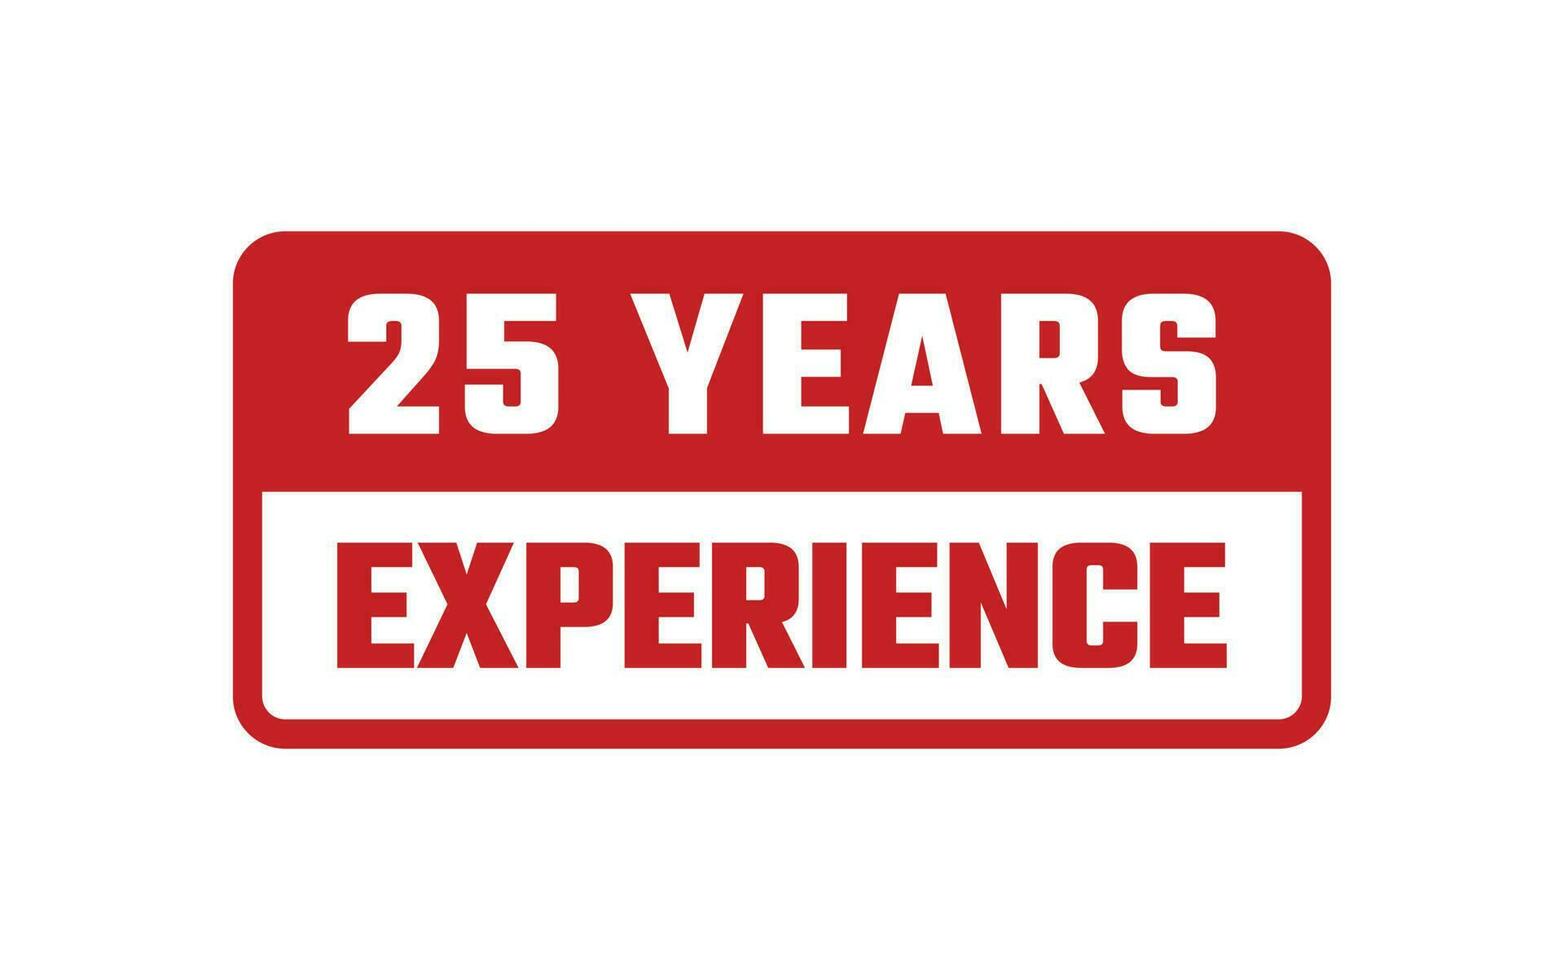 25 Years Experience Rubber Stamp vector